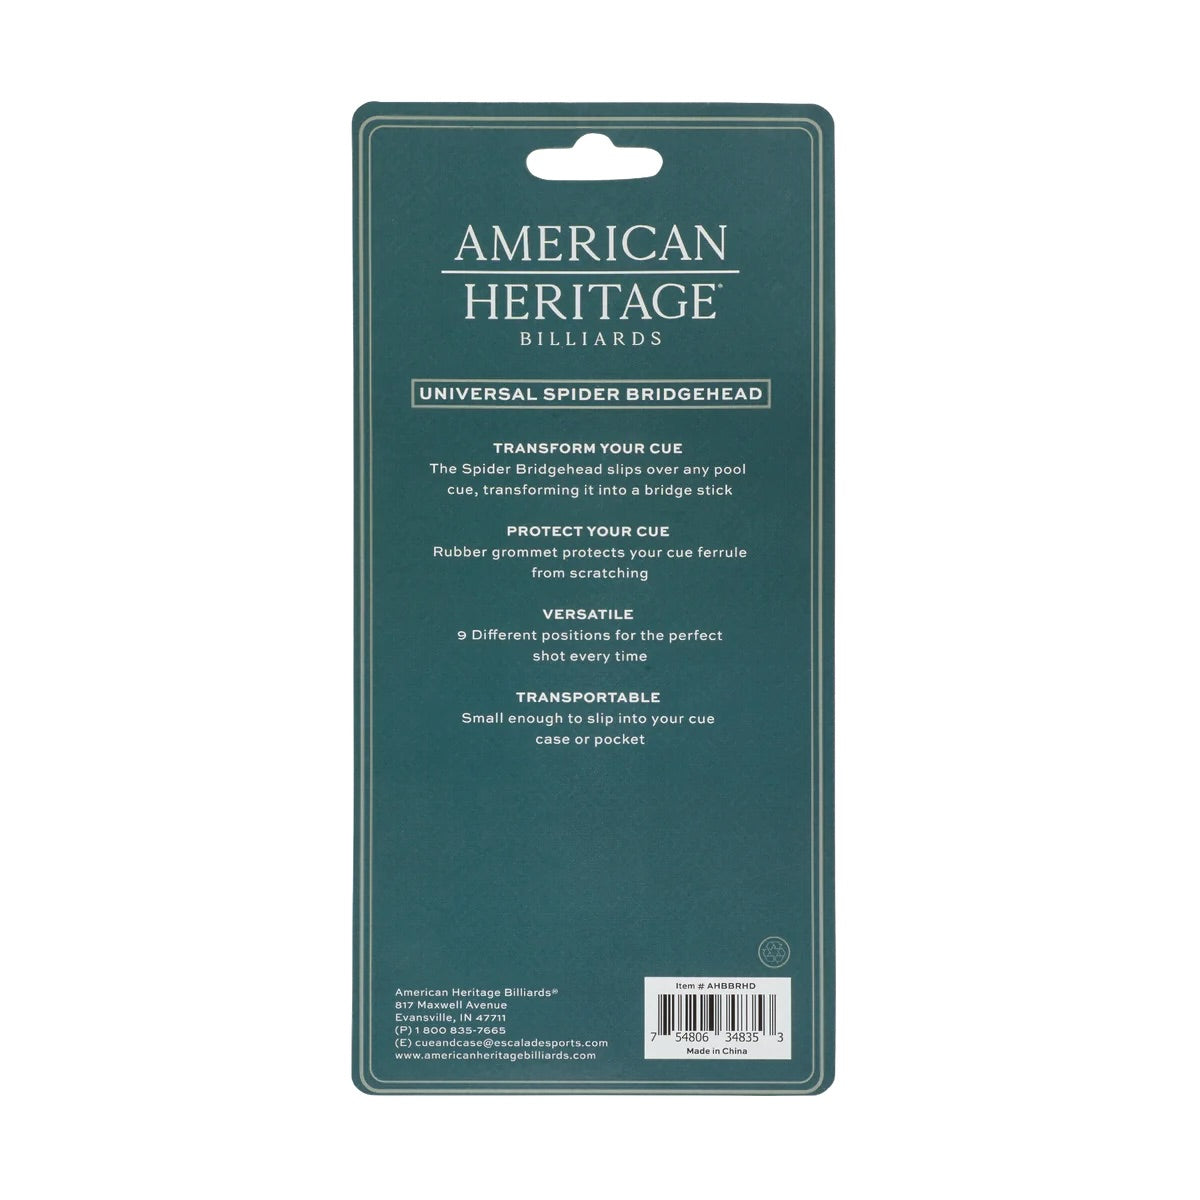 Backside cover of packaged universal spider bridgehead for pool by American Heritage.